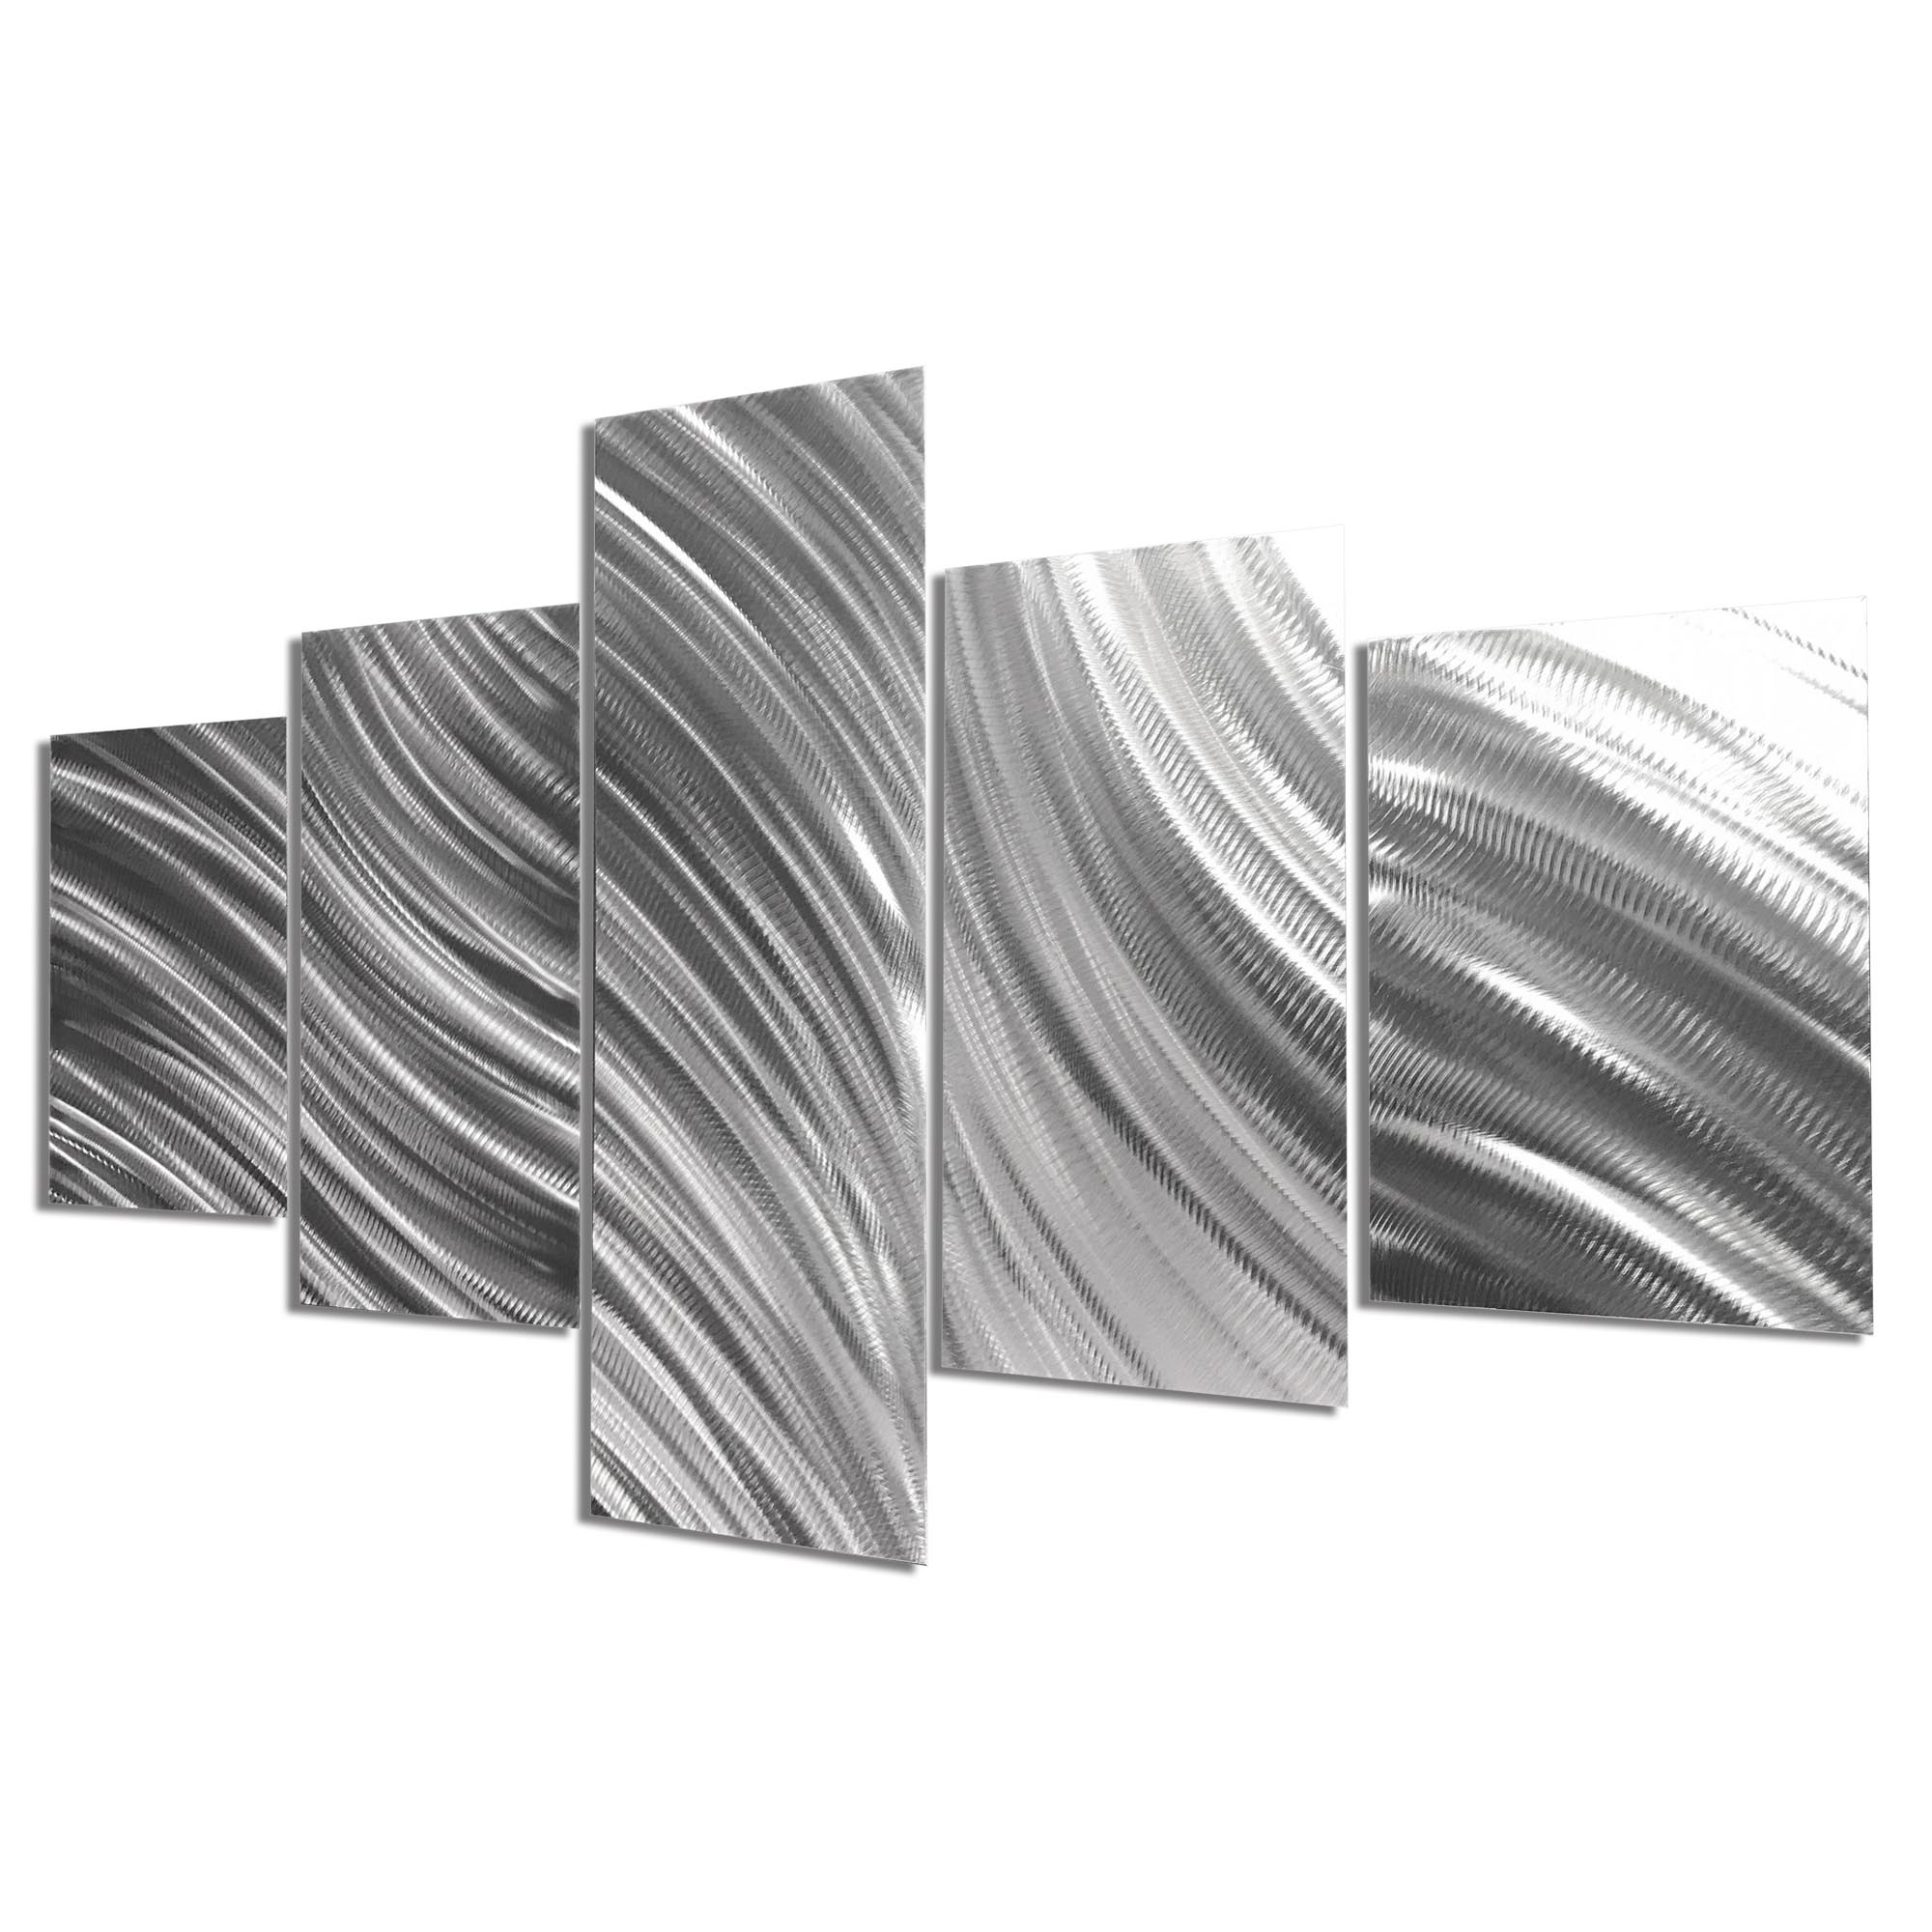 Columnar Flow 64x36in. Natural Aluminum Abstract Decor - Image 2